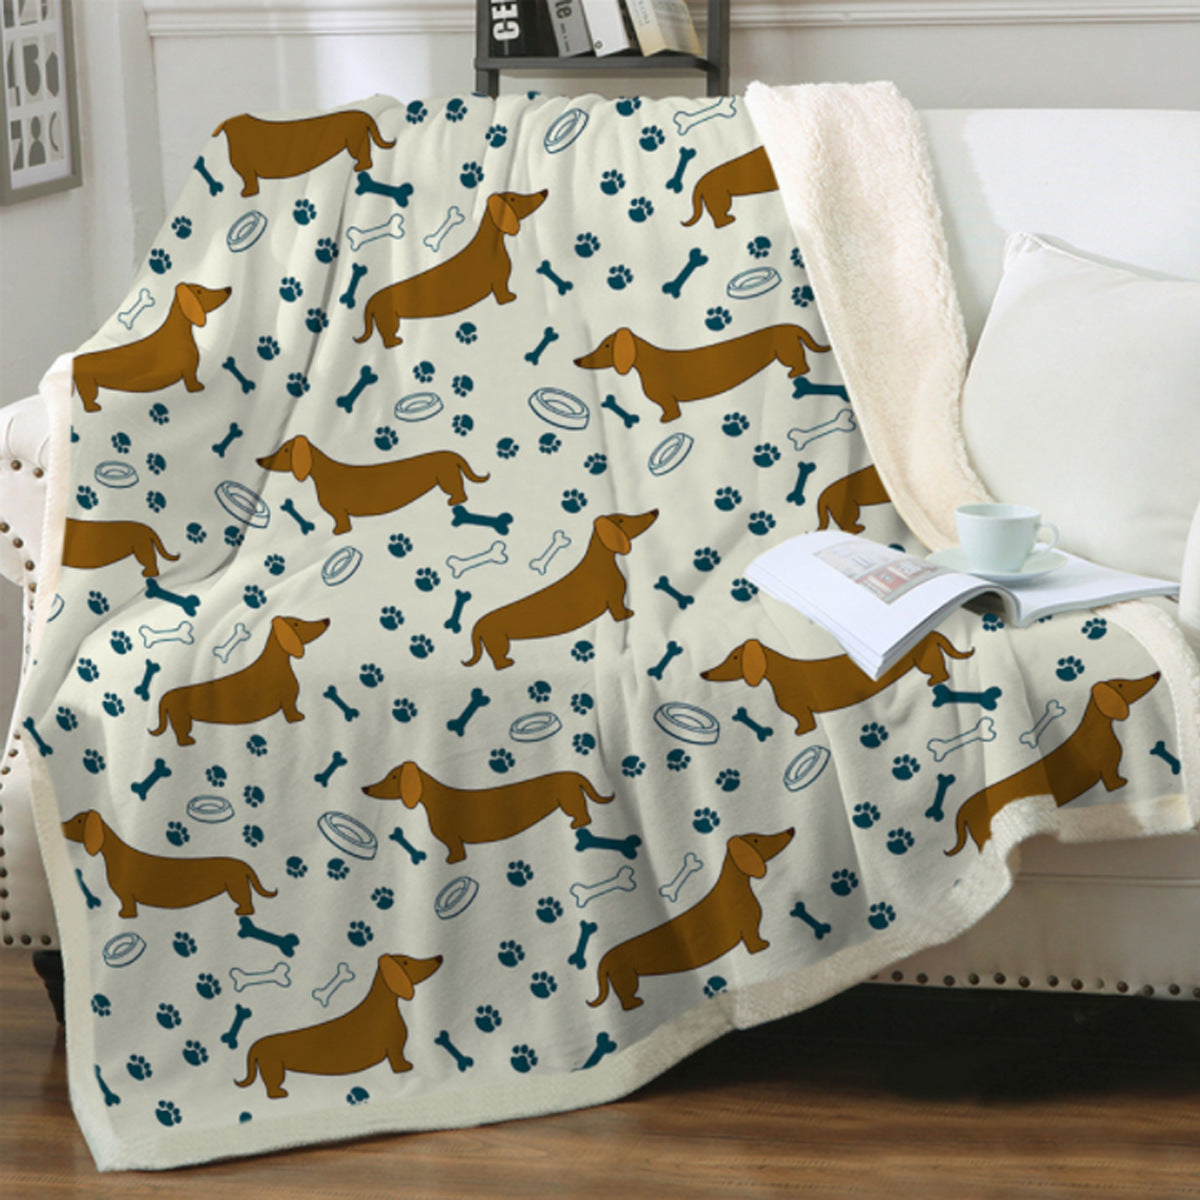 Cute Dog Print Fleece Blankets for Christmas-Blankets-1-5-40*60 inches-Free Shipping at meselling99